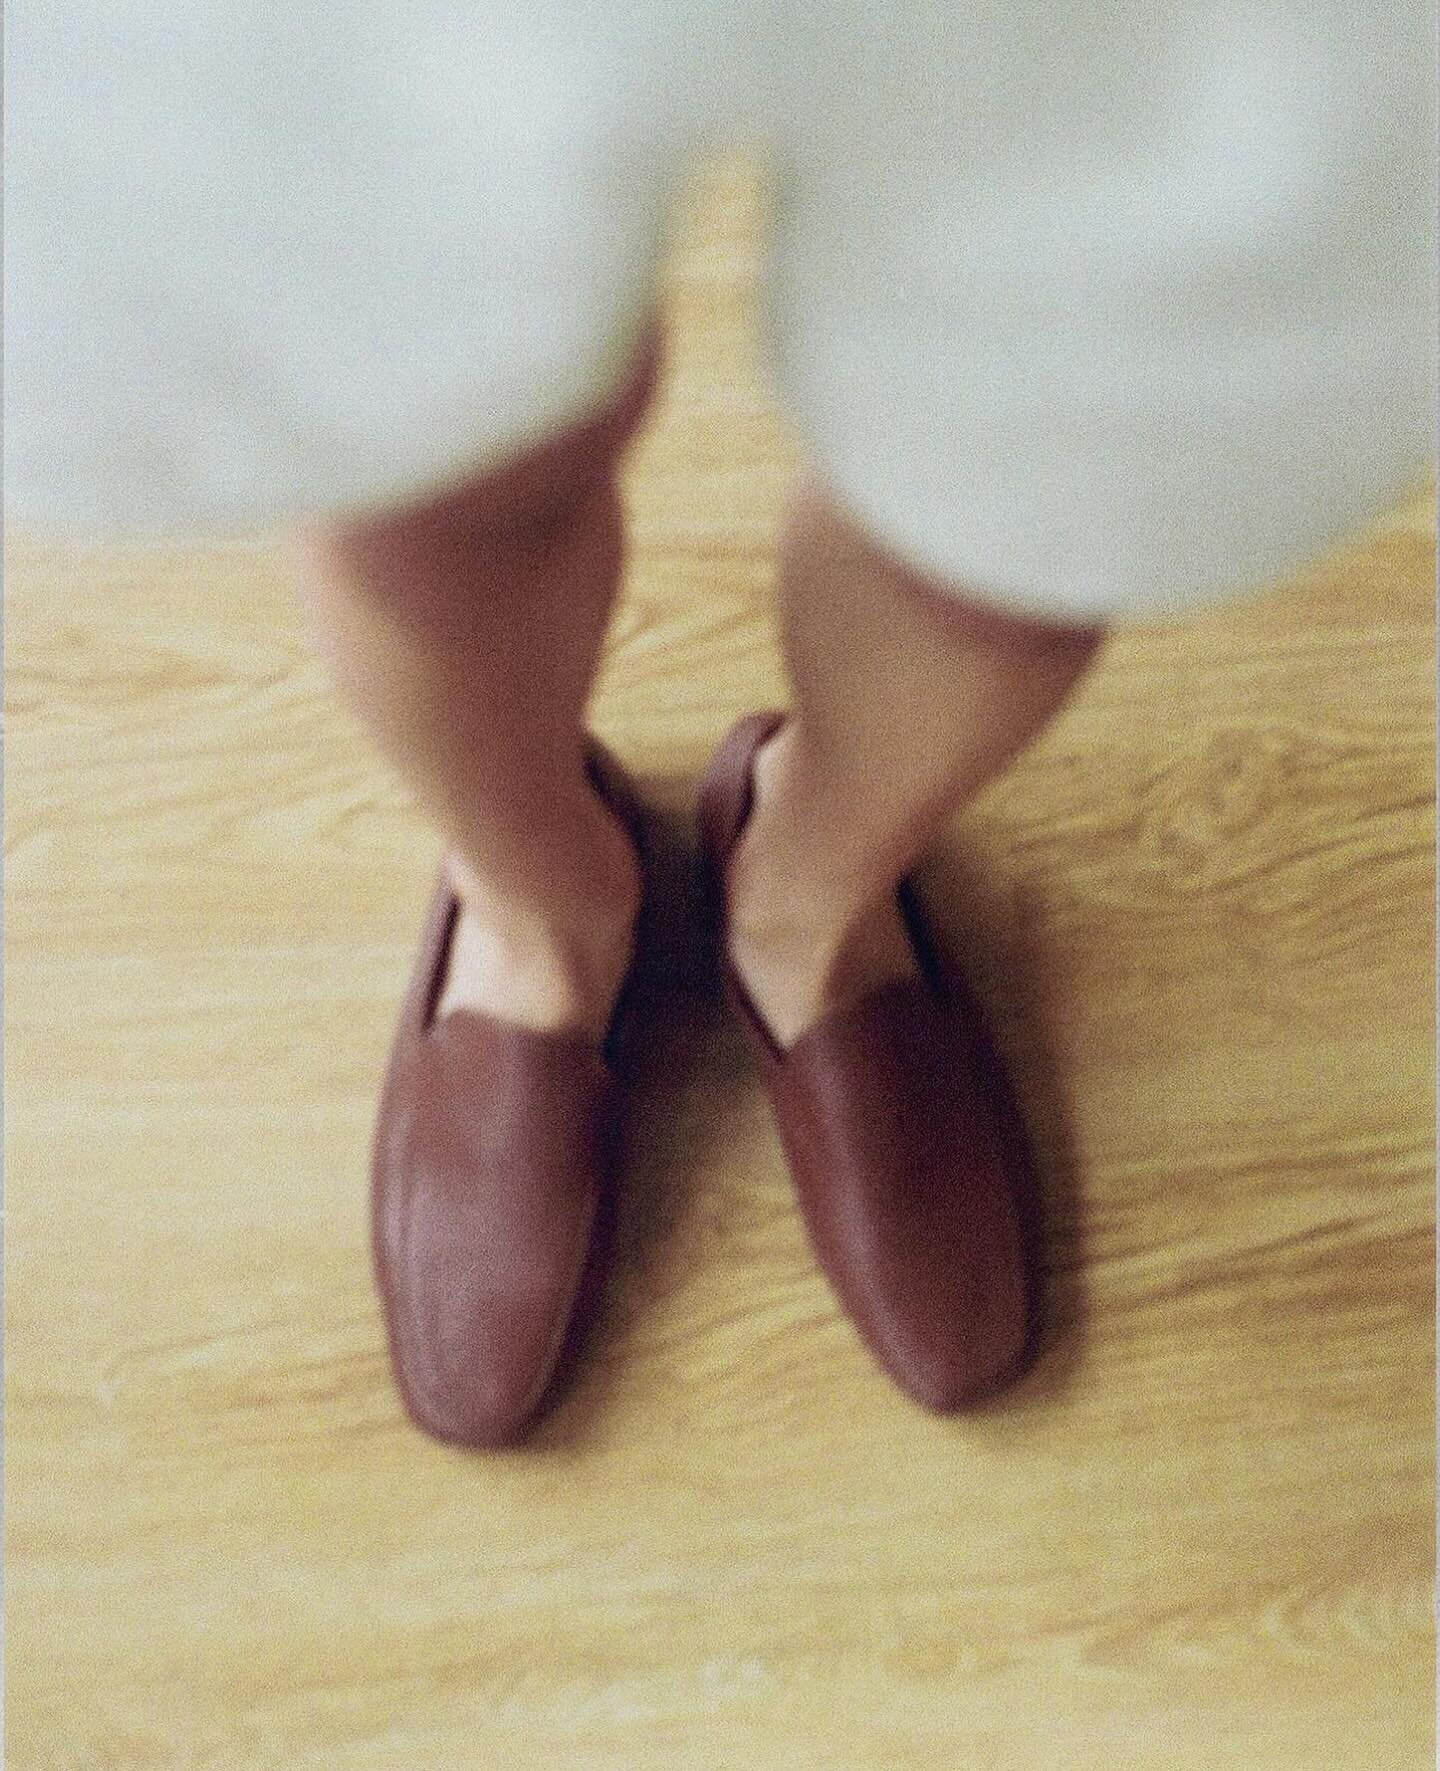 The Amadeo Hazelnut is a catch. 👀 Aupr&egrave;s shoes are perfect for any occasion, season, or mood. Click the link in the bio to explore the brand&rsquo;s gender-neutral collection. 💞
 photo by: @hubertyang 

#aupres #aupresshoes #madeinportugal #